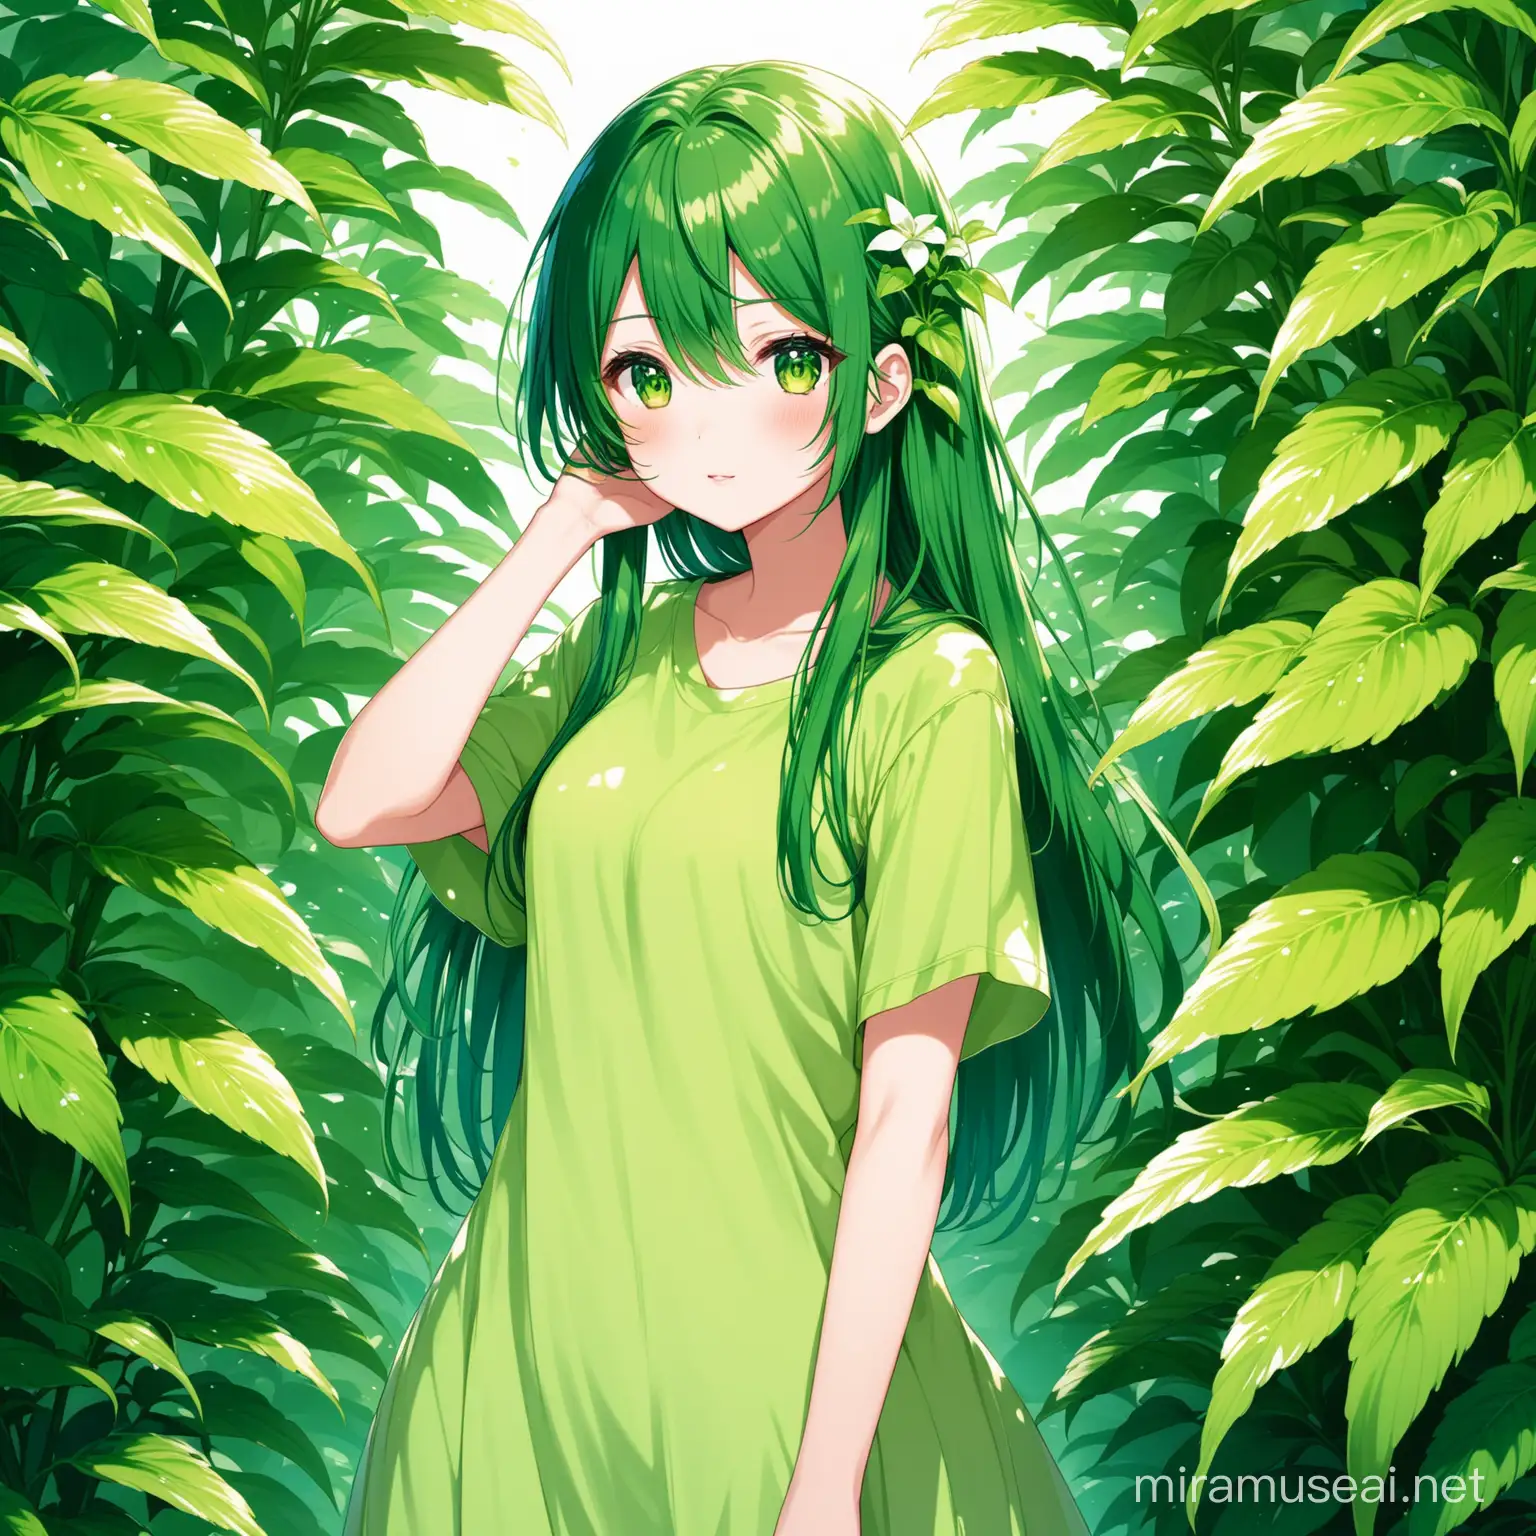 anime girl with green plants
